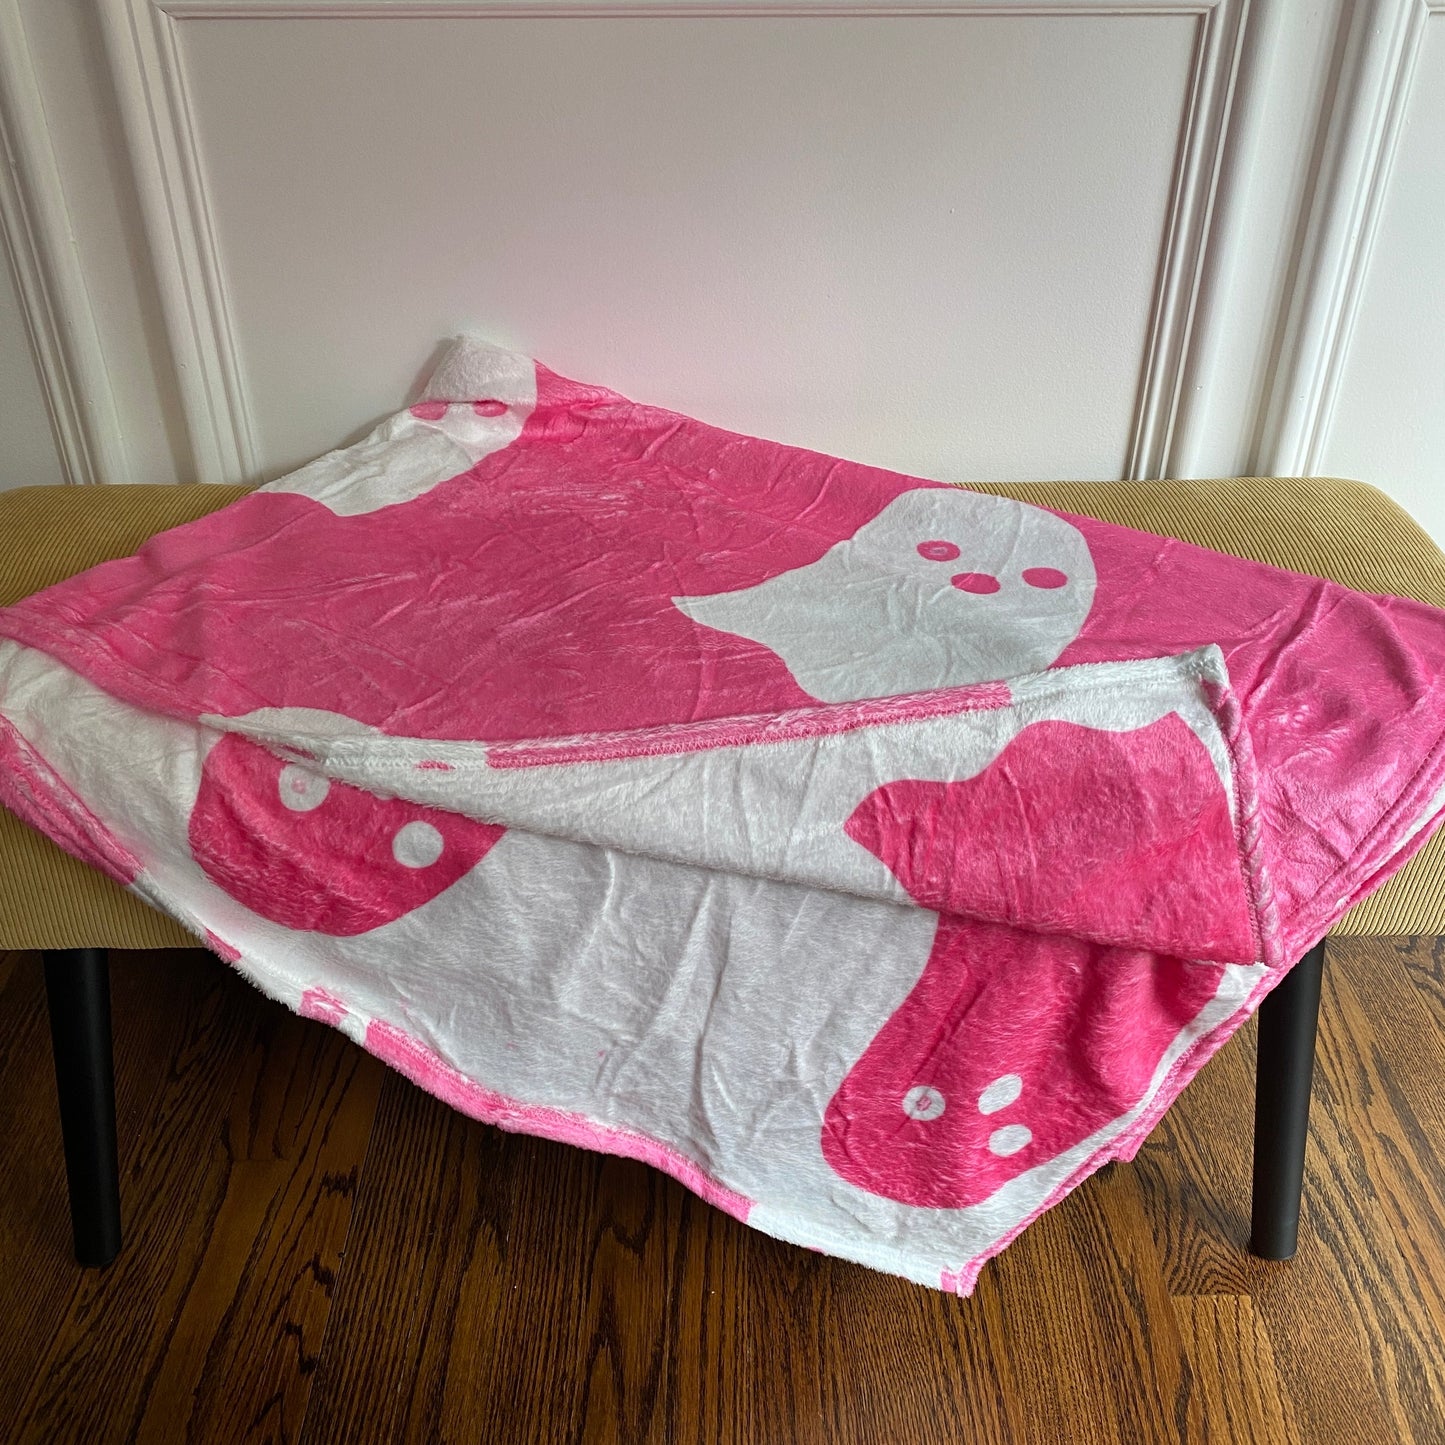 Blanket - Halloween - Double Sided Ghosts Pink & White